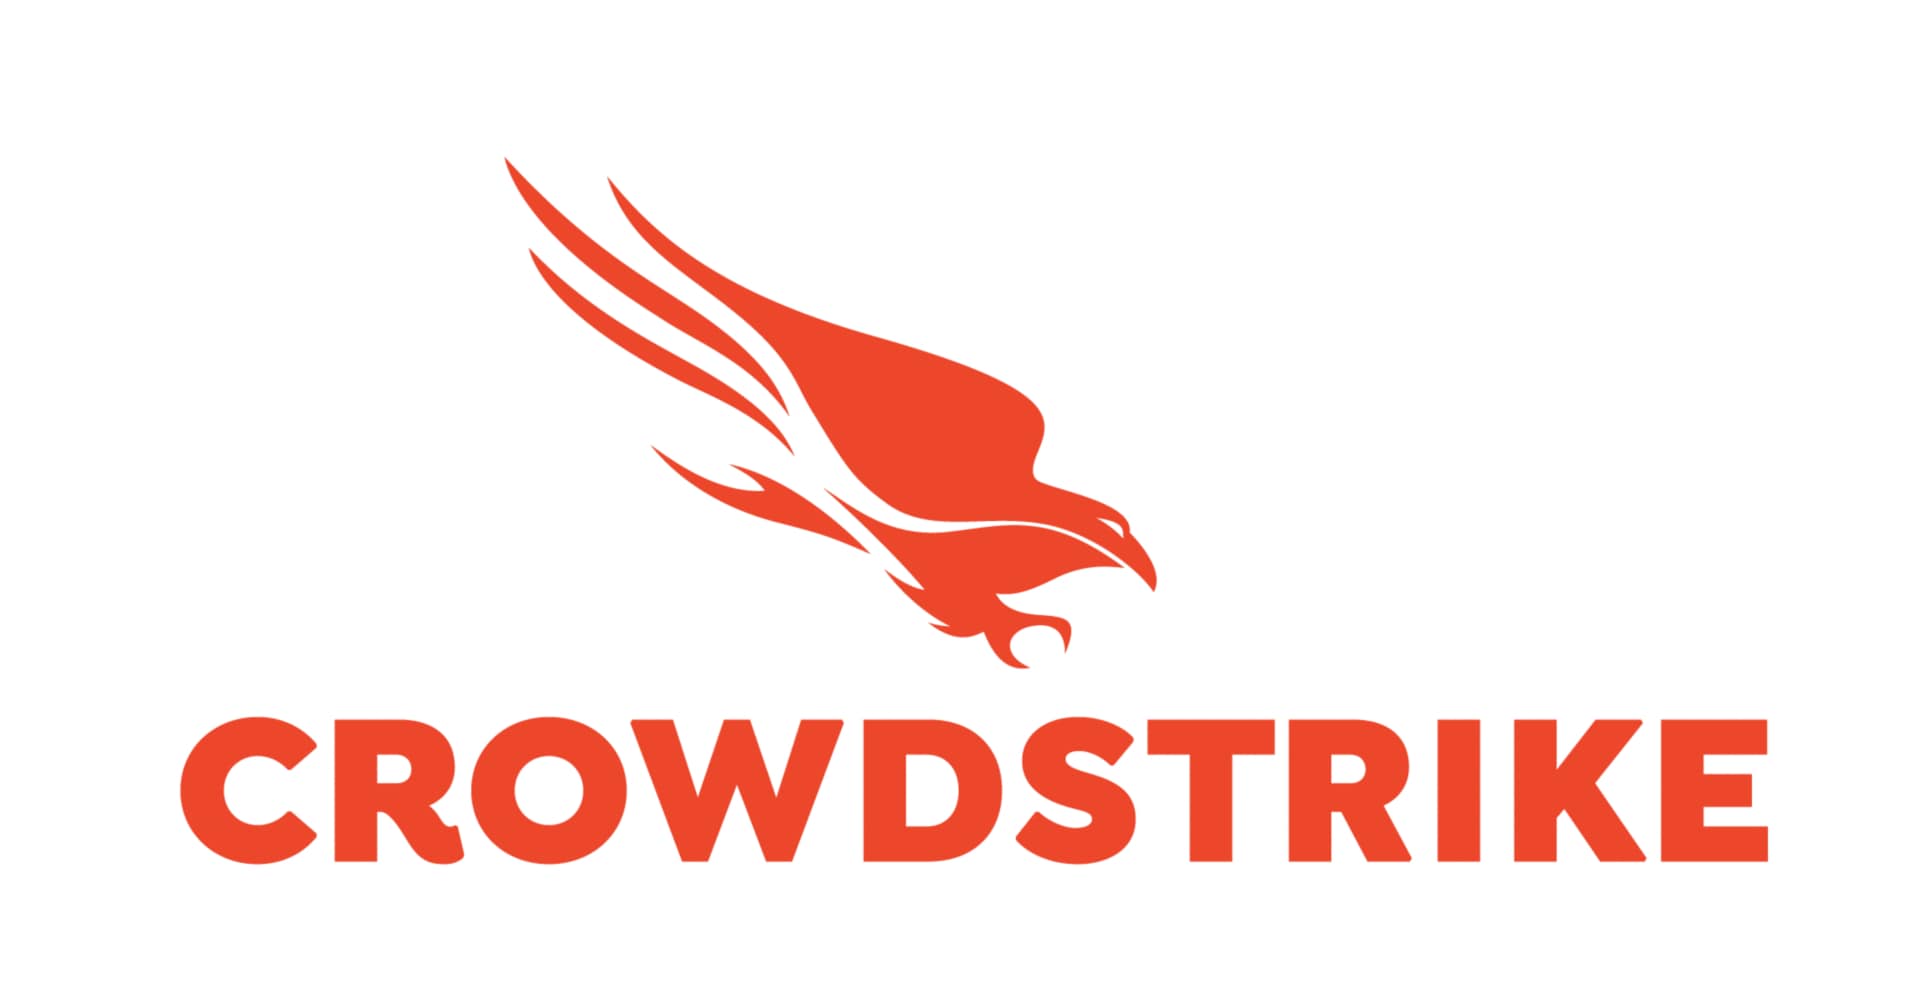 CrowdStrike 8-Month Falcon Intelligence Recon Software Subscription